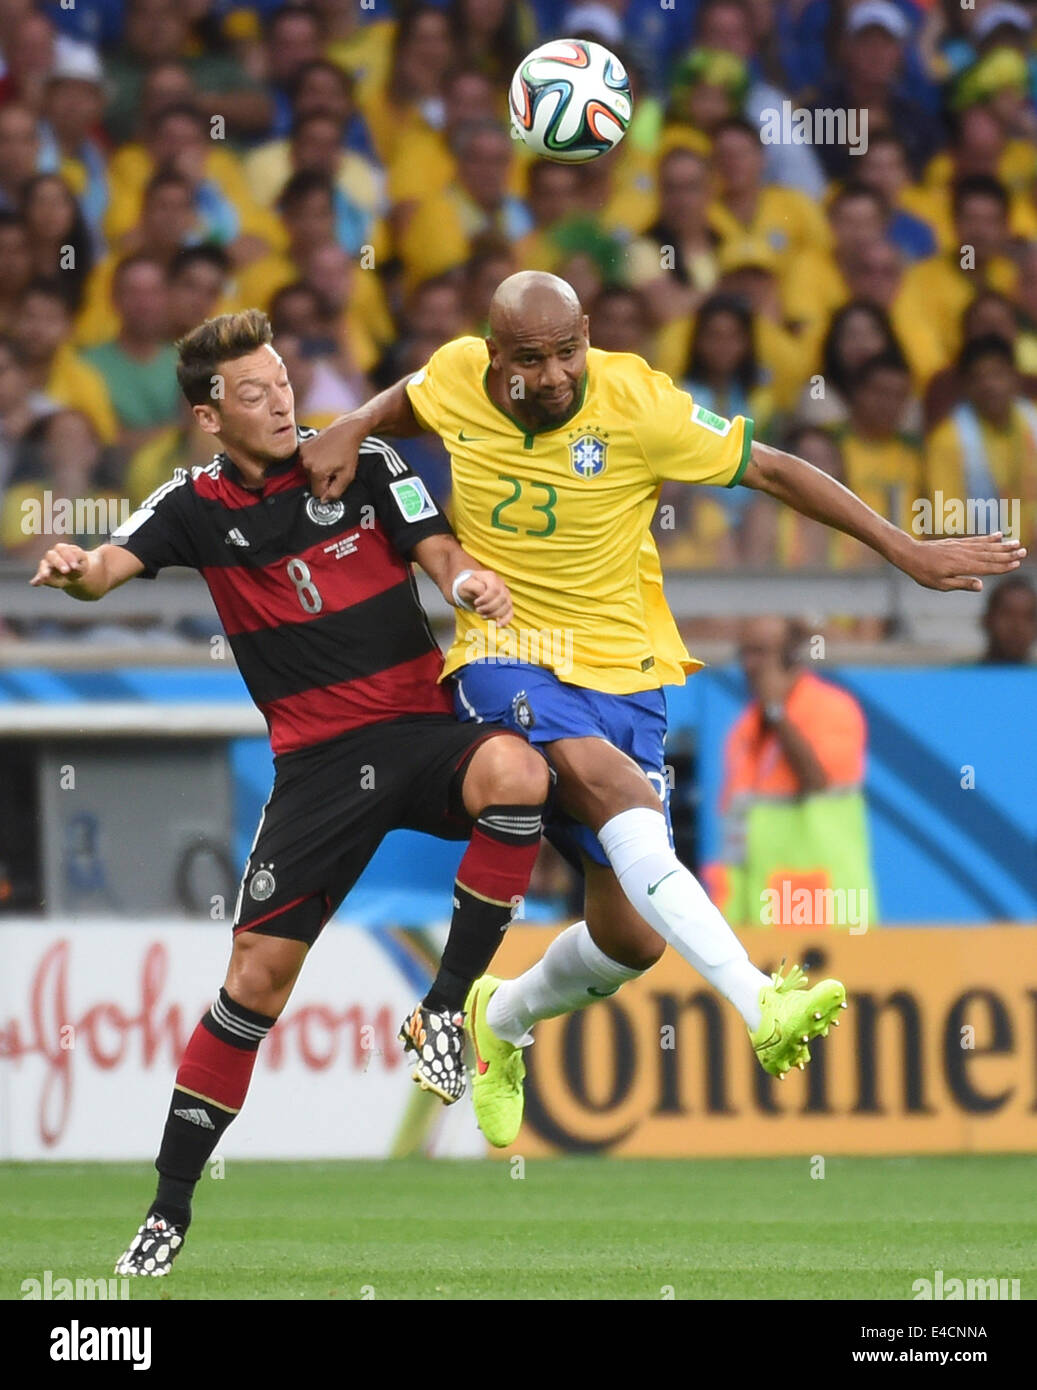 (140708) -- BELO HORIZONTE, July 8, 2014 (Xinhua) -- Brazil's Maicon vies with Germany's Mesut Ozil during a semifinal match between Brazil and Germany of 2014 FIFA World Cup at the Estadio Mineirao Stadium in Belo Horizonte, Brazil, on July 8, 2014. Stock Photo